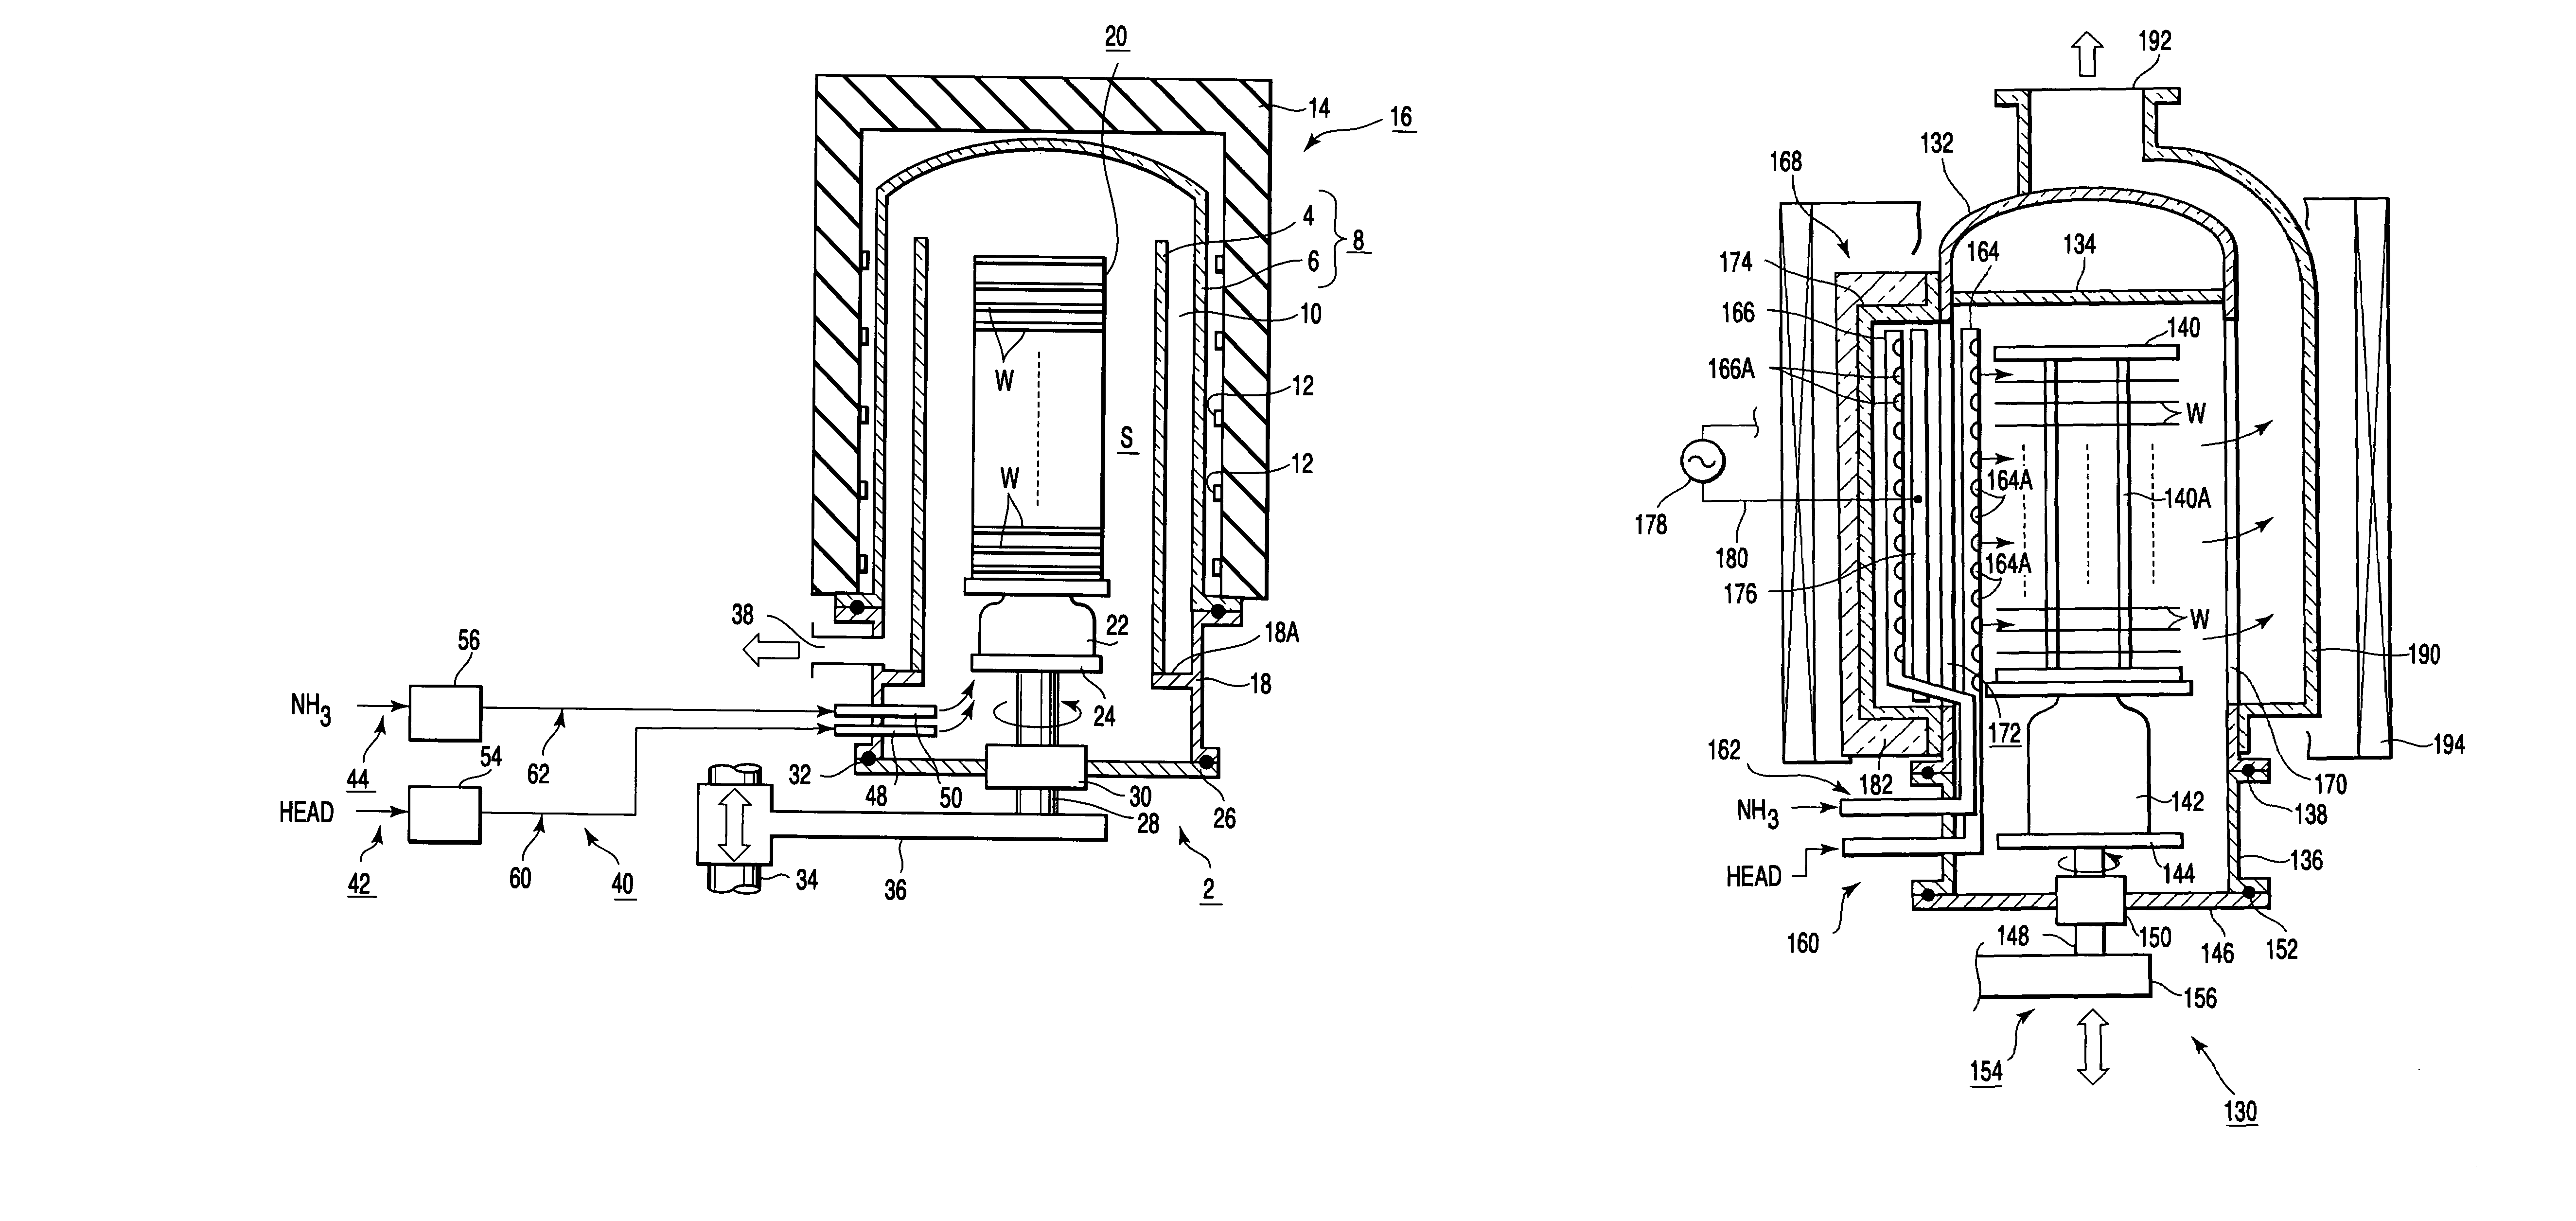 Method of CVD for forming silicon nitride film on substrate